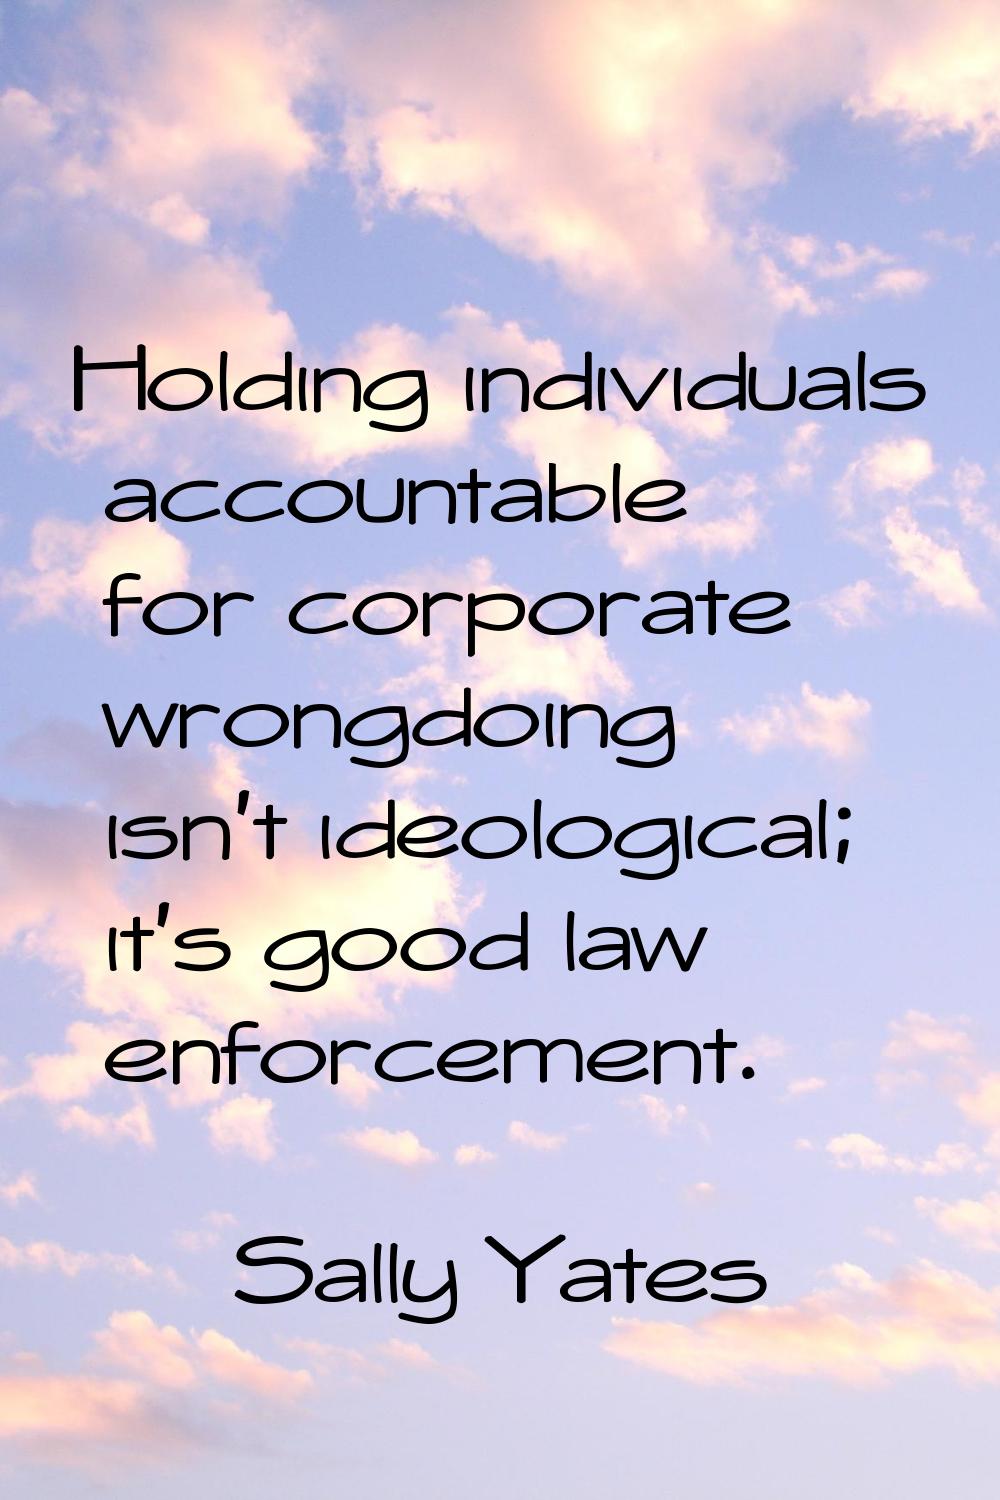 Holding individuals accountable for corporate wrongdoing isn't ideological; it's good law enforceme